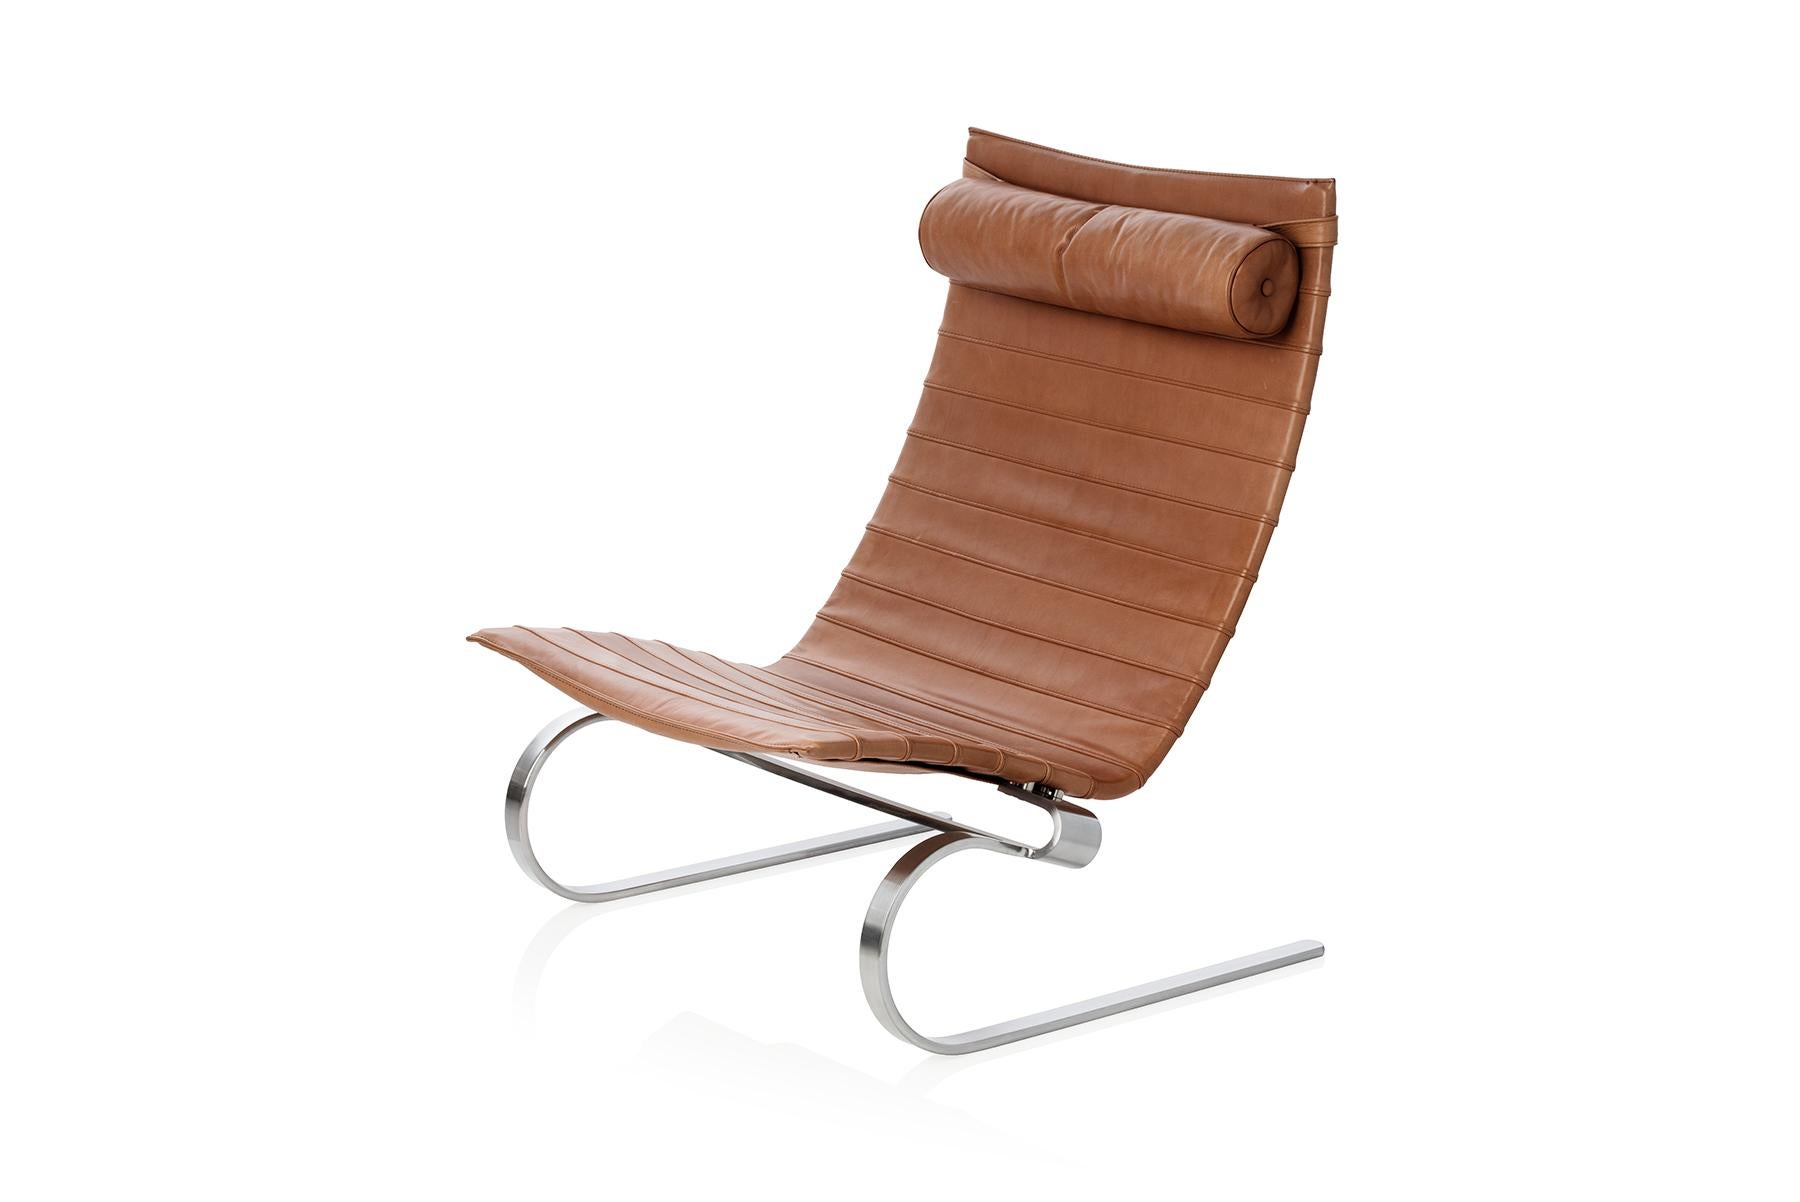 PK20 is a laidback and elegant lounge chair. PK20 is built upon a flexible matt chromed spring steel frame. The original idea for the chair was to use the excess leather strips from the production of other leather furniture to optimize production.